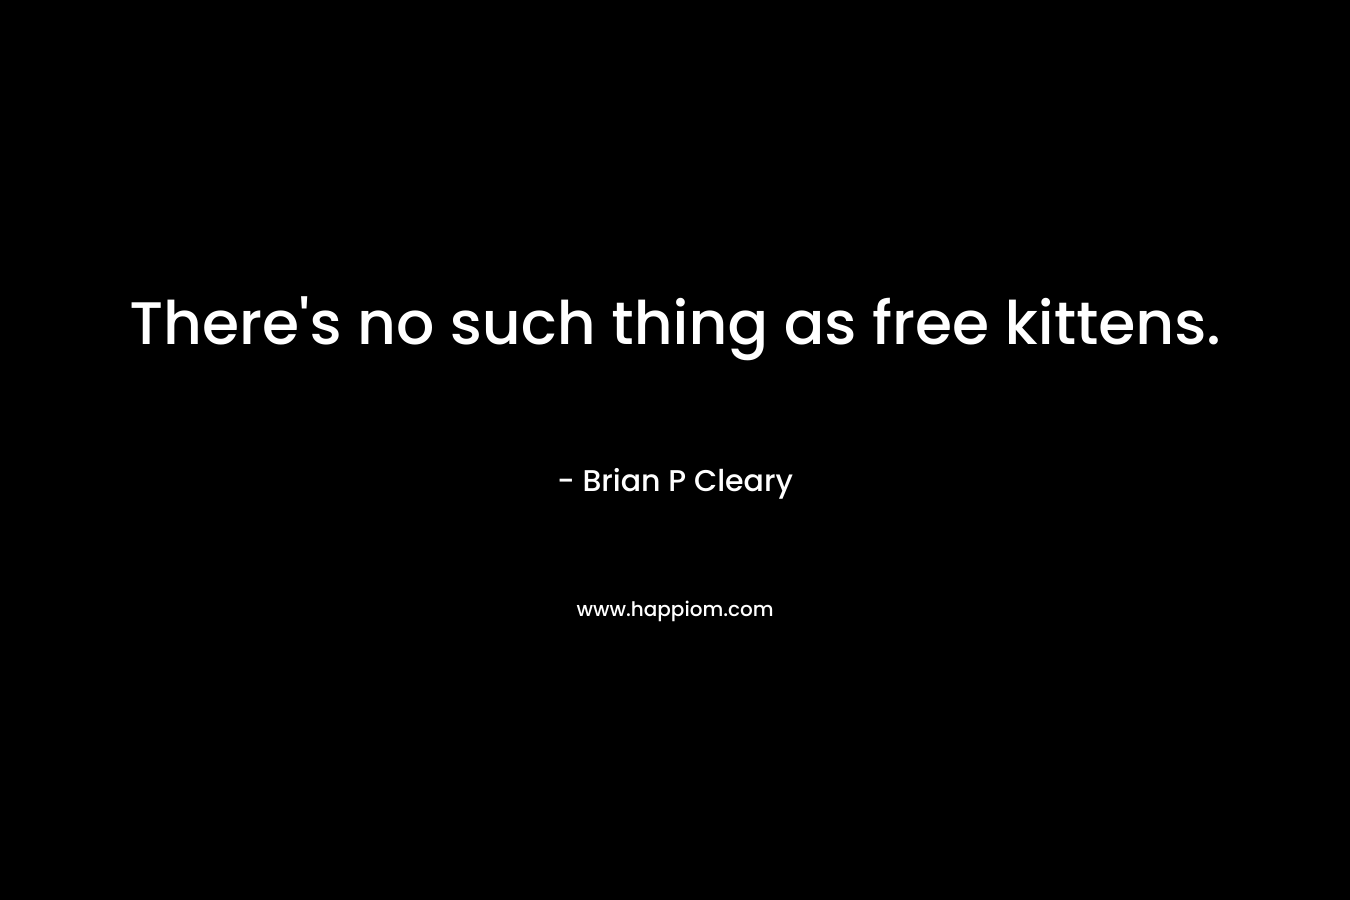 There’s no such thing as free kittens. – Brian P Cleary